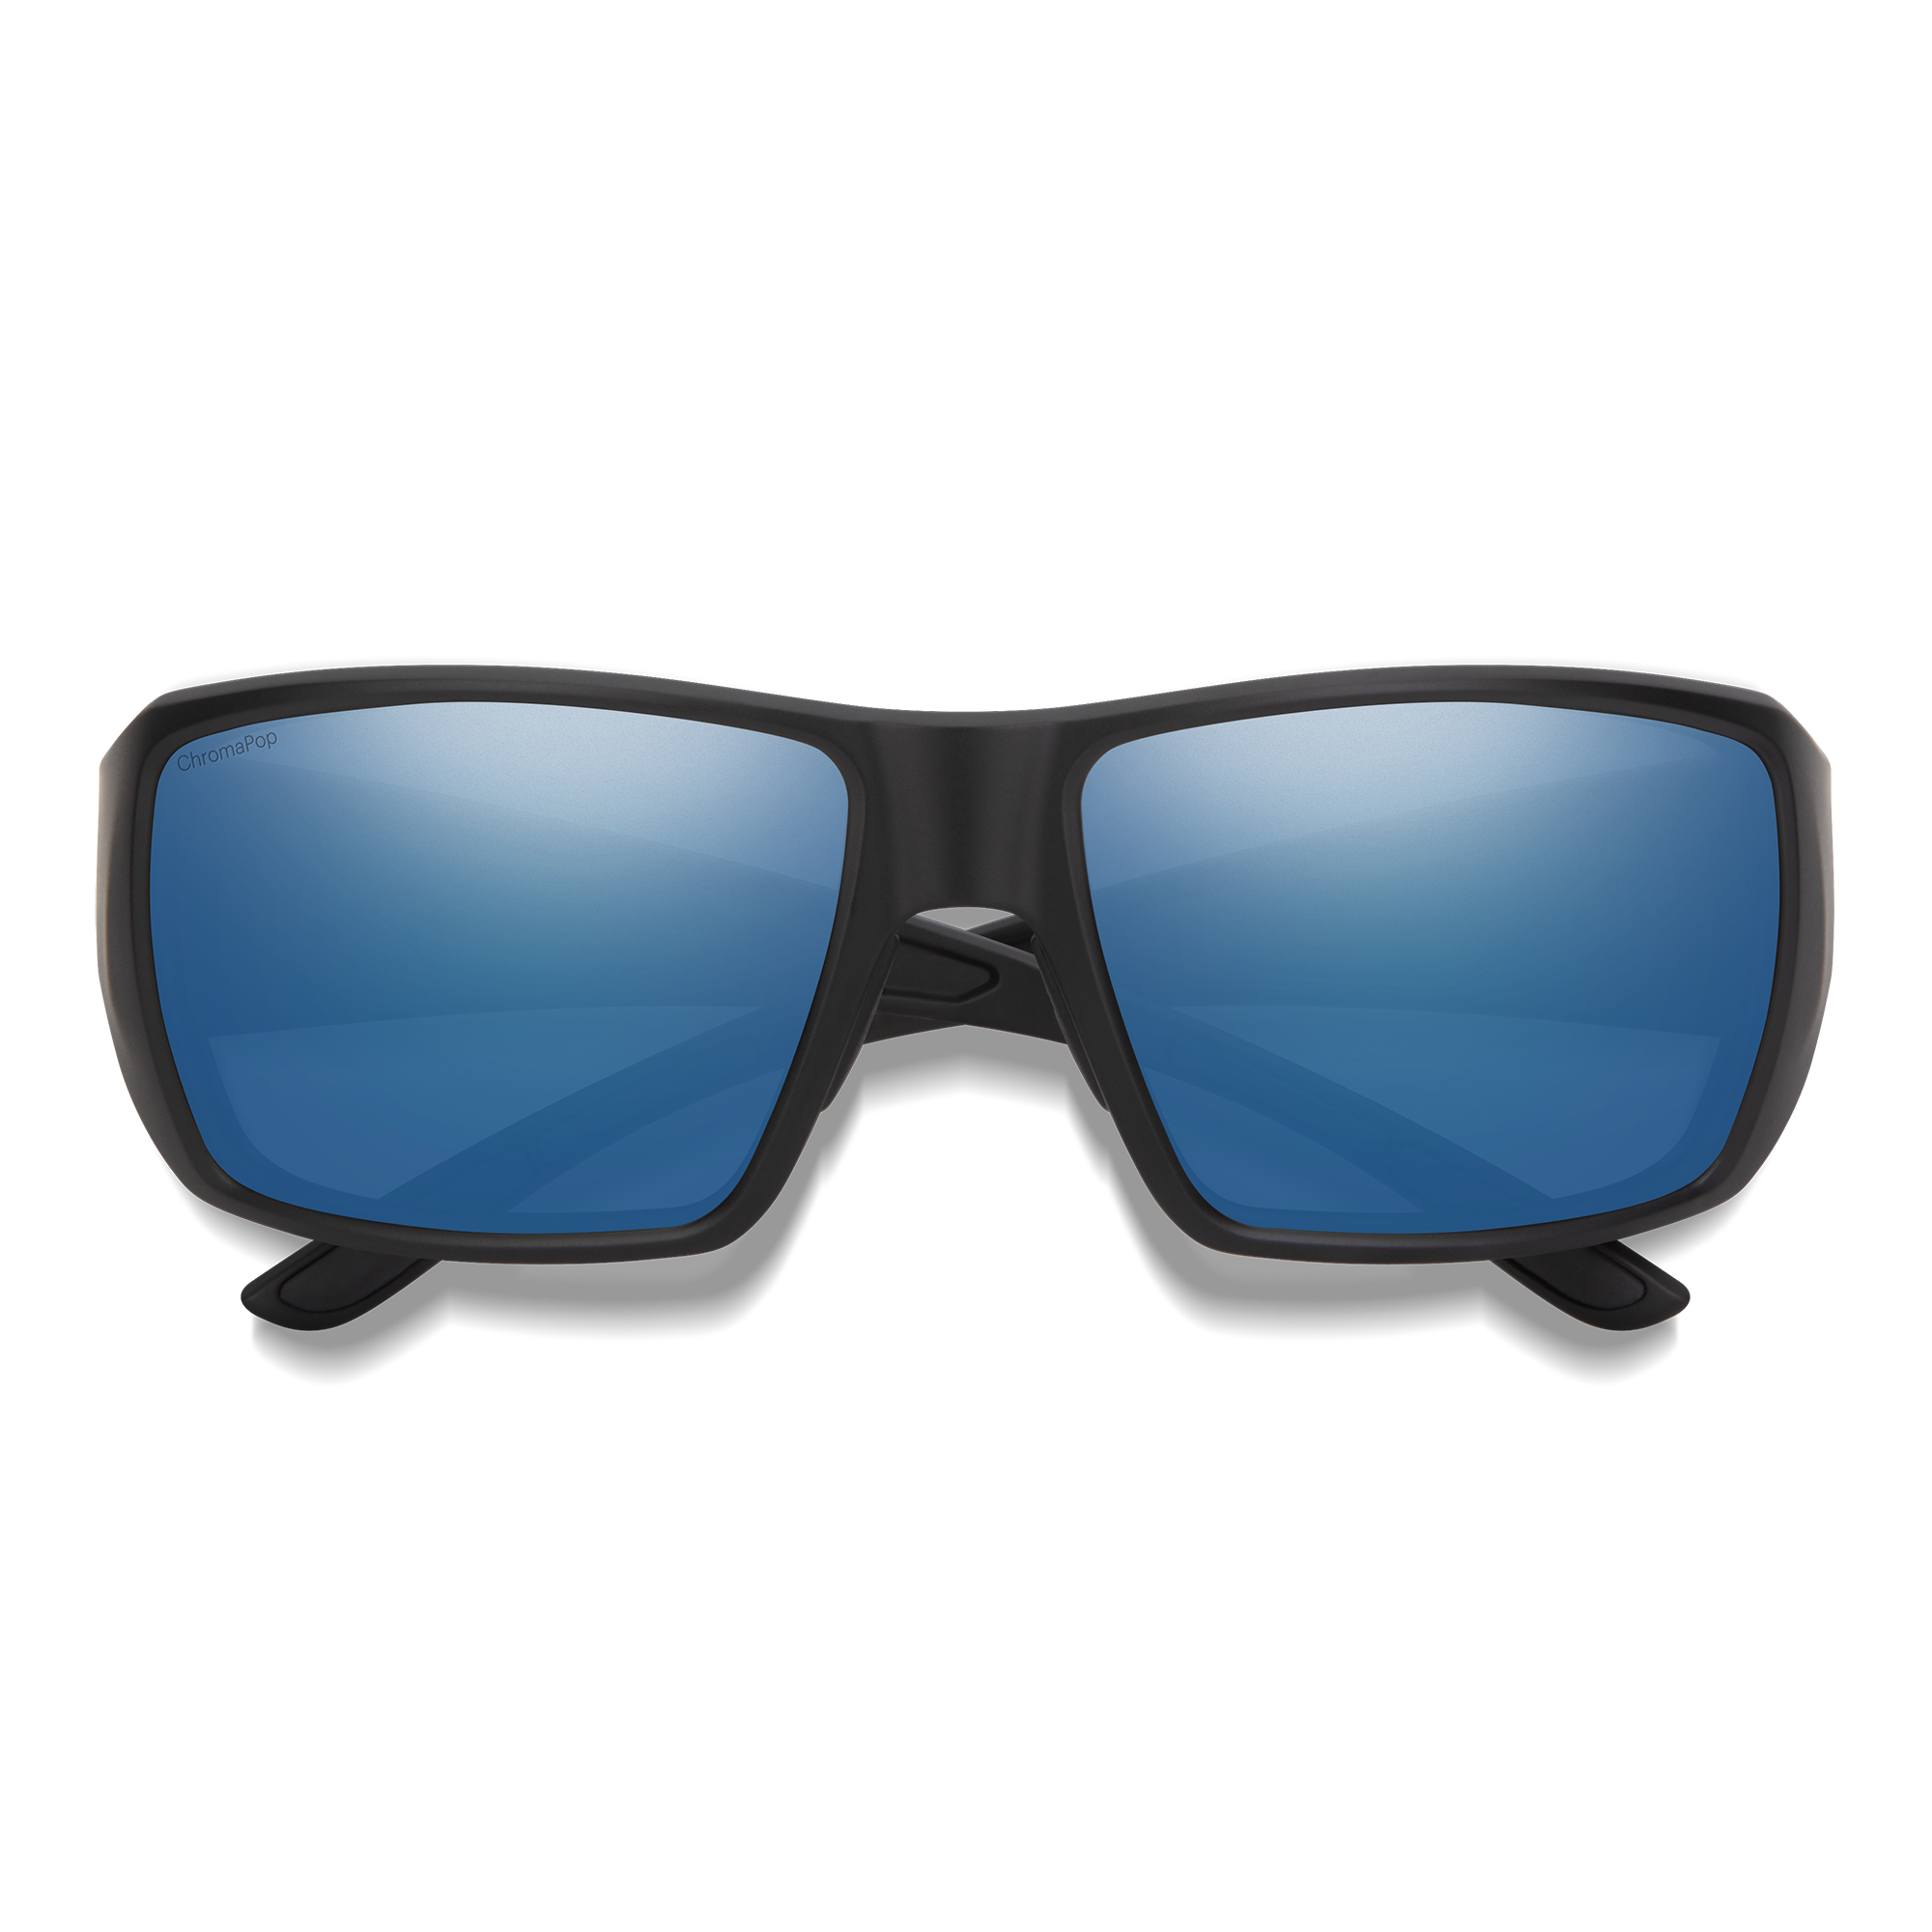 Buy Guide's Choice S starting at CAD 345.00 | Smith Optics